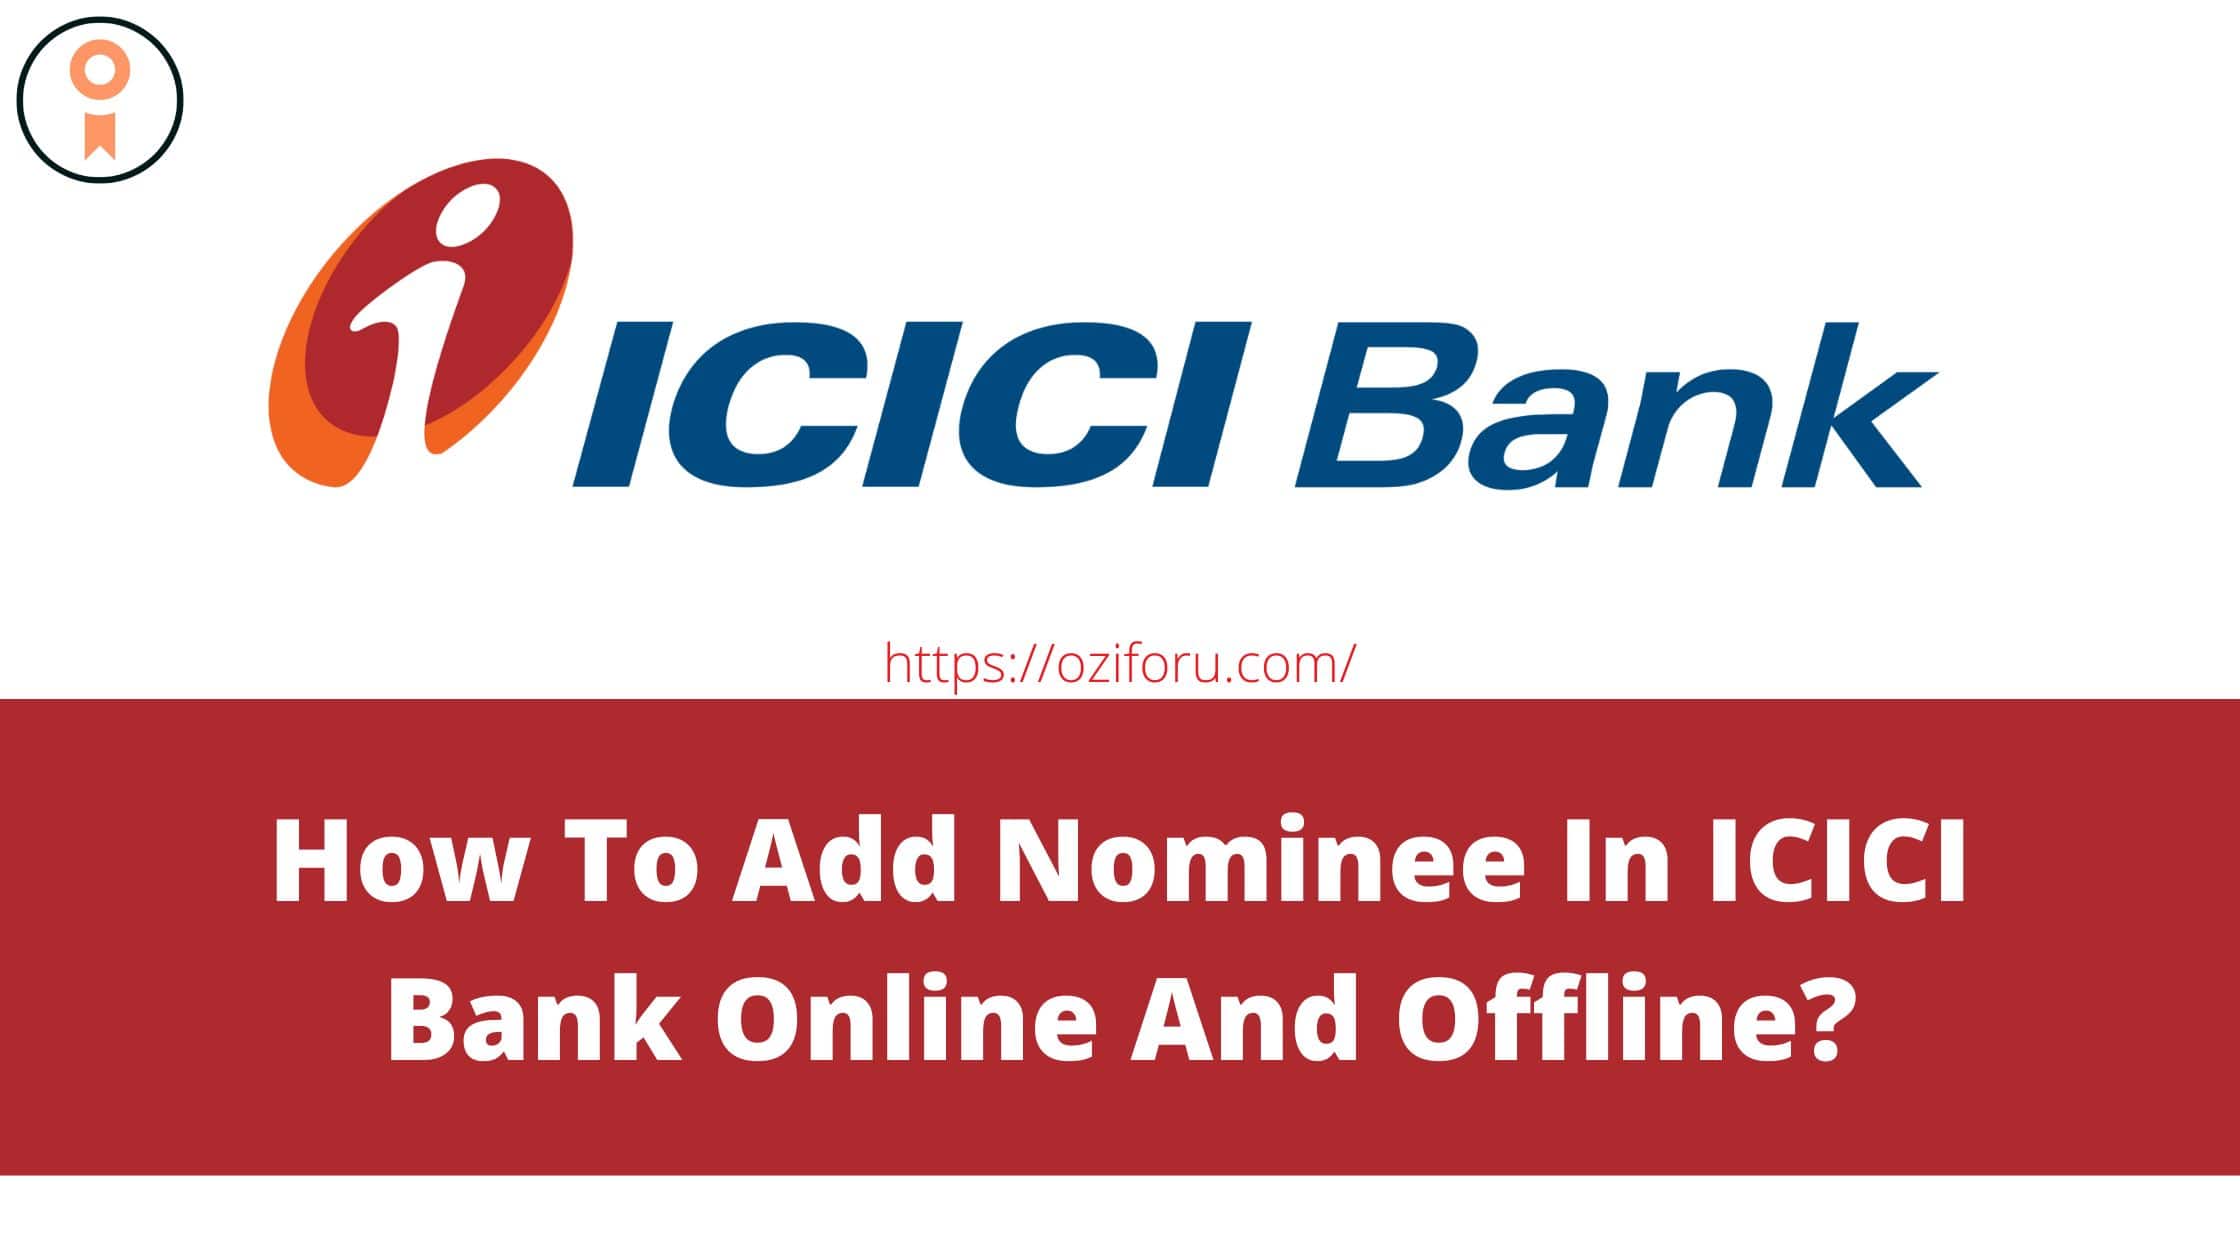 How To Add Nominee In ICICI Bank Online And Offline?